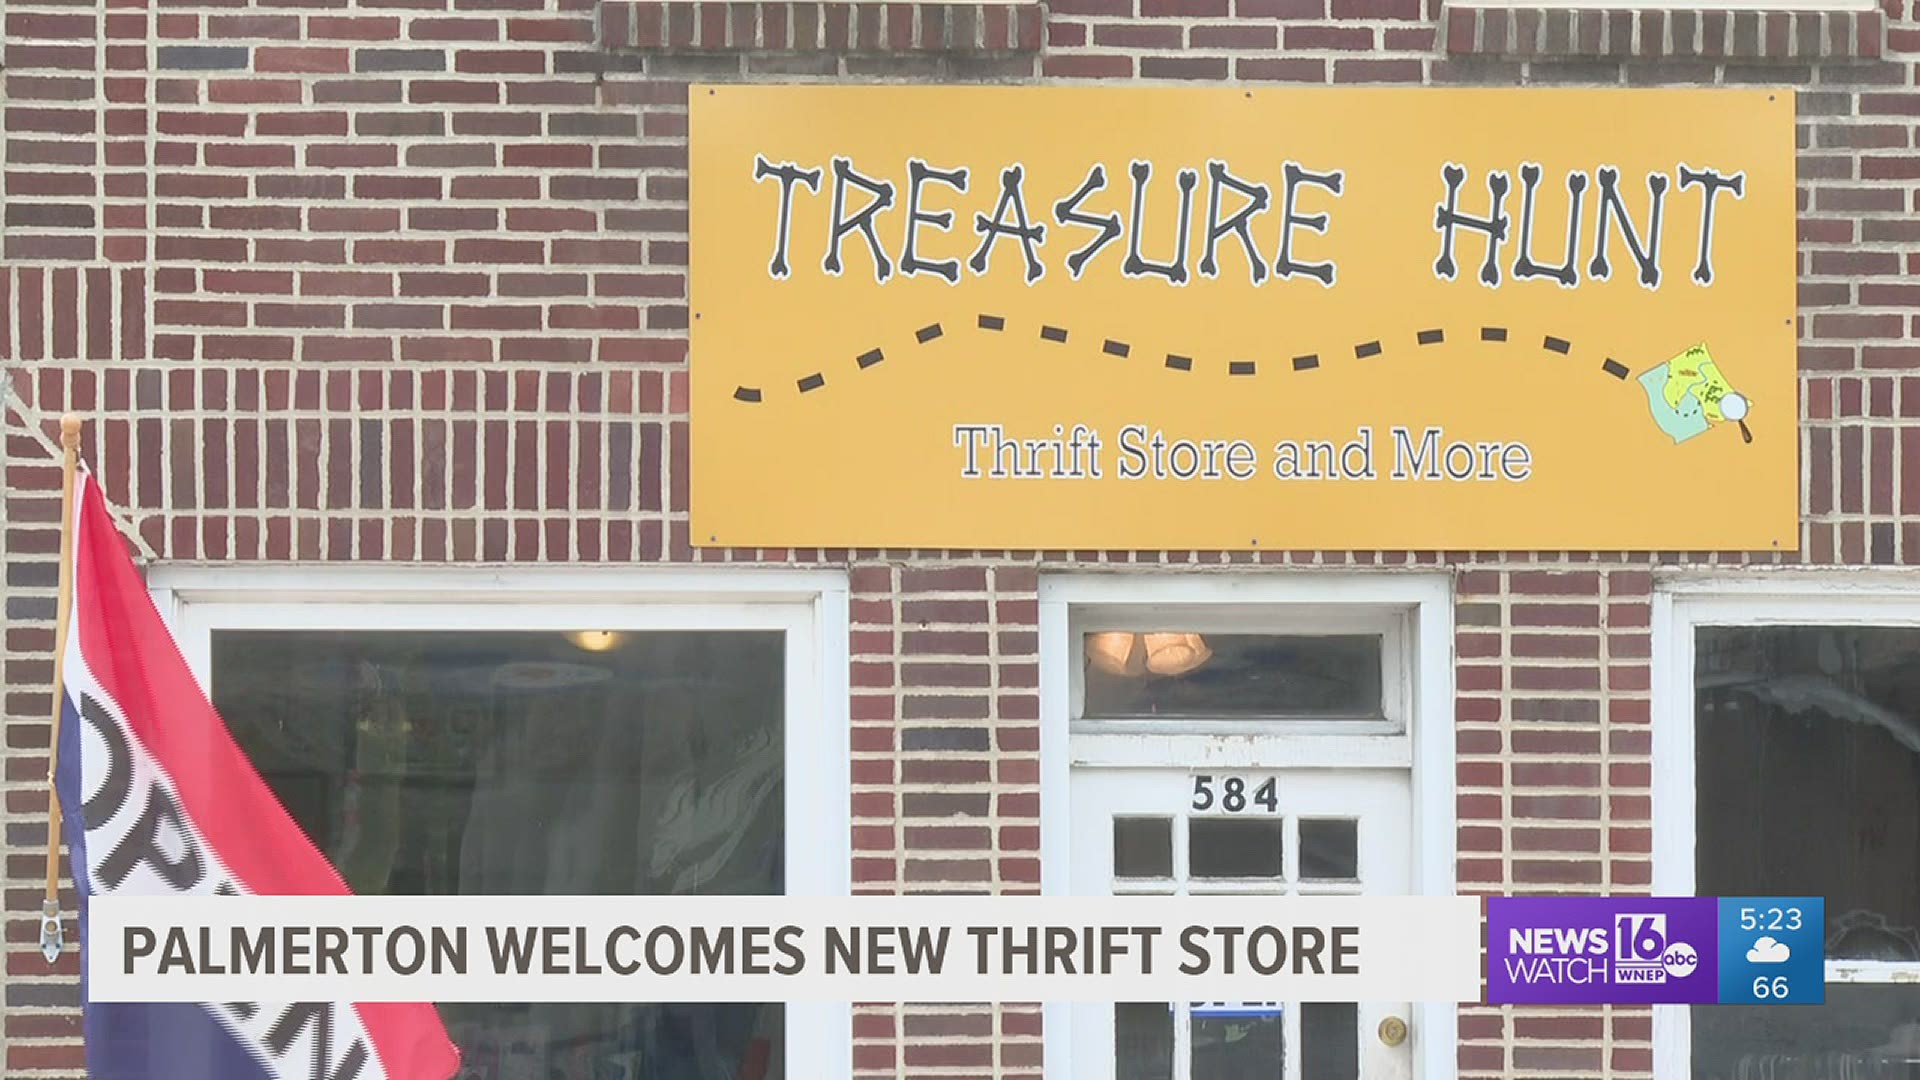 Treasure Hunt Thrift and More is on Delaware Avenue in downtown Palmerton.